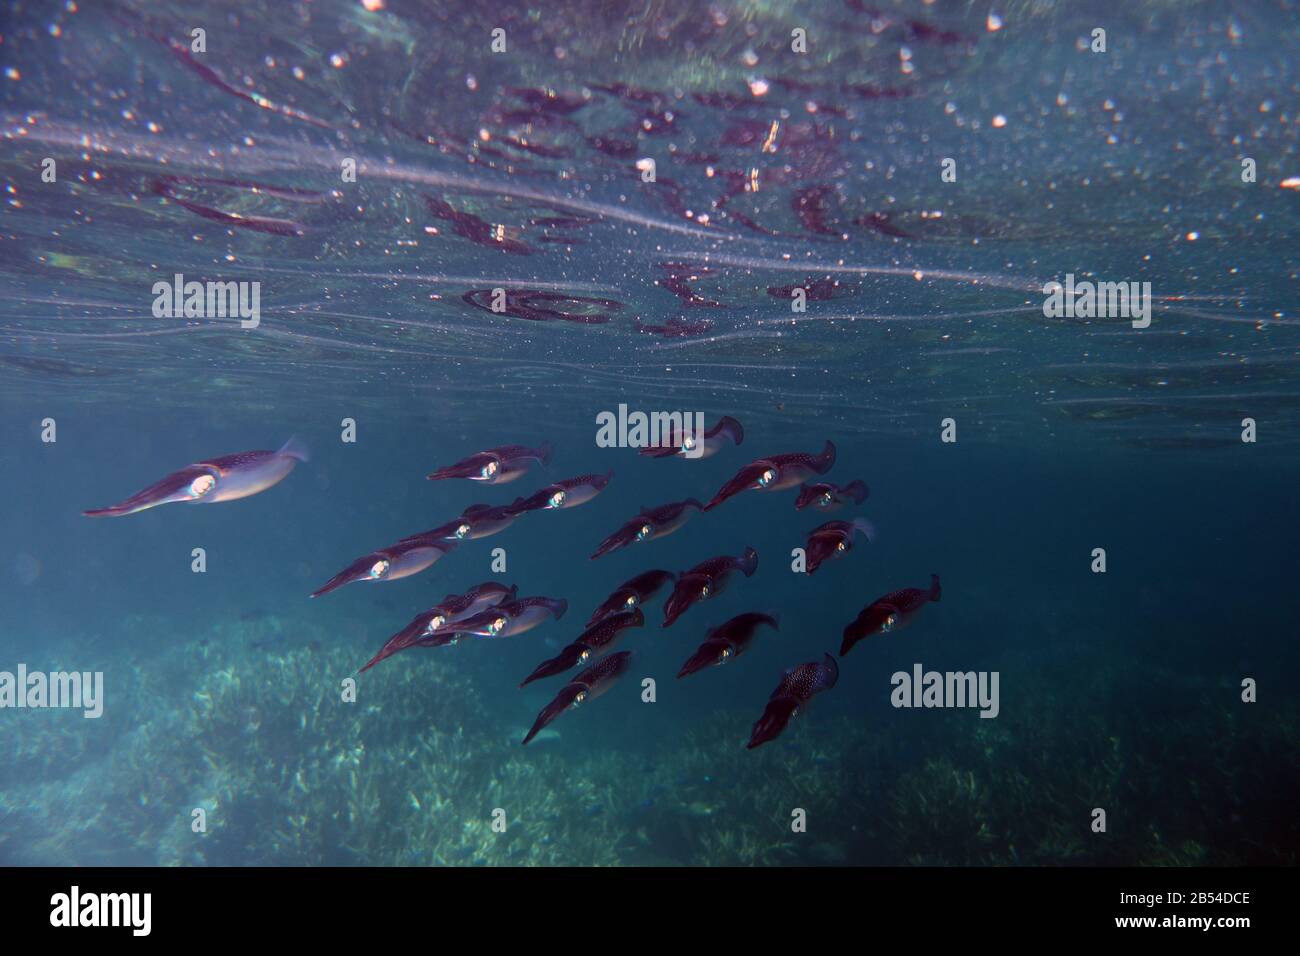 Squad of bigofin Reef squid (Sépioteuthis lessoniana), Heron Island, Capricorn Bunker Group, Great Barrier Reef, Queensland, Australie Banque D'Images